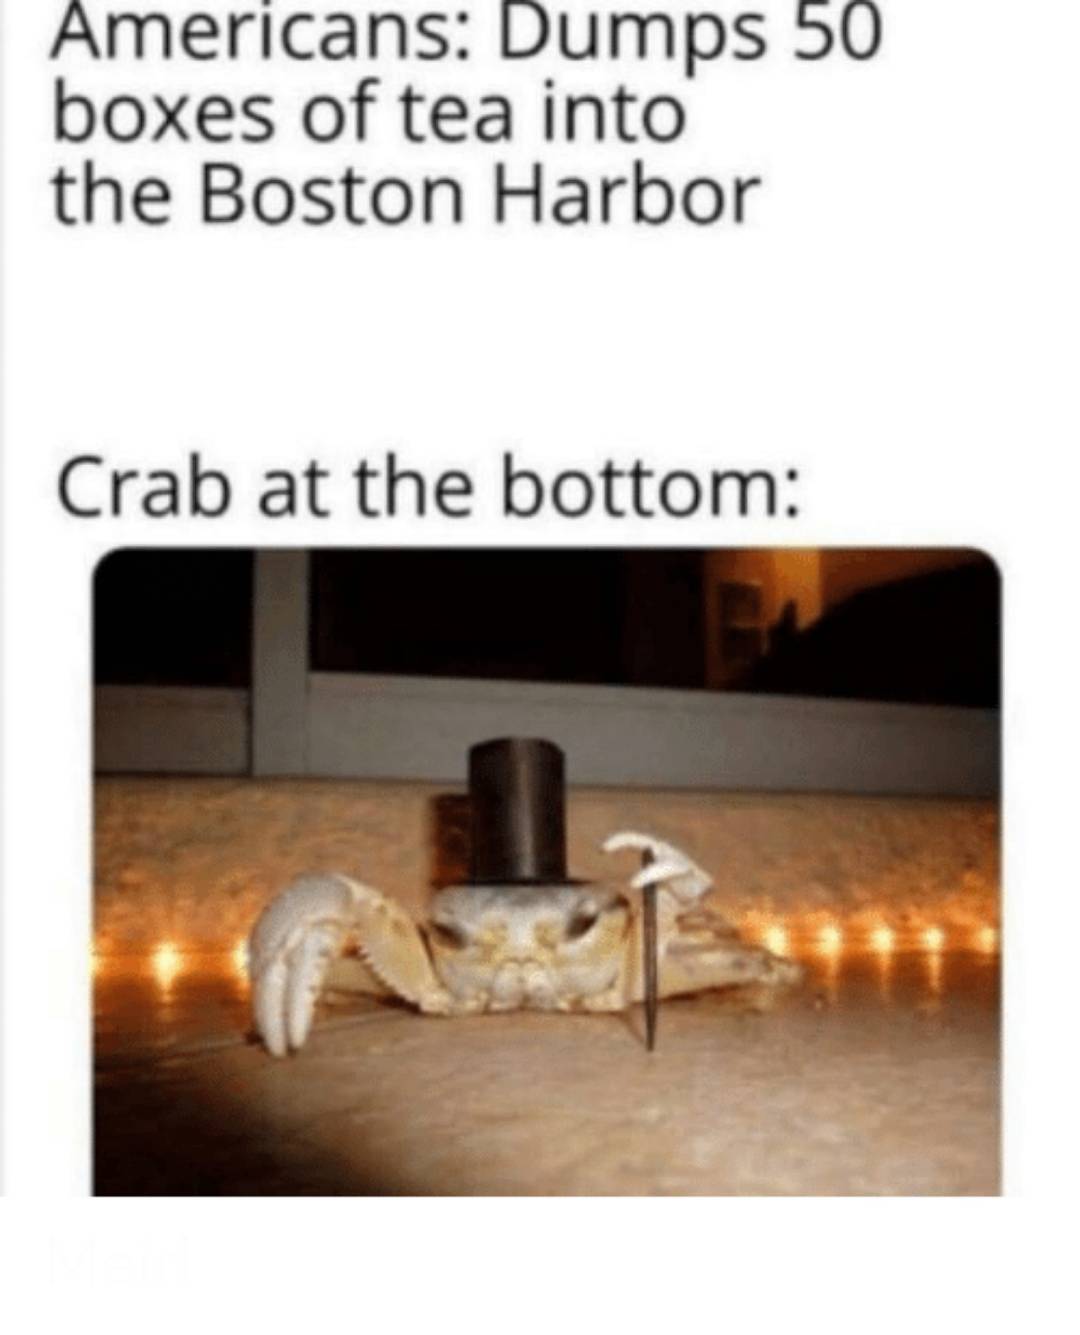 fancy crab meme - Americans Dumps 50 boxes of tea into the Boston Harbor Crab at the bottom